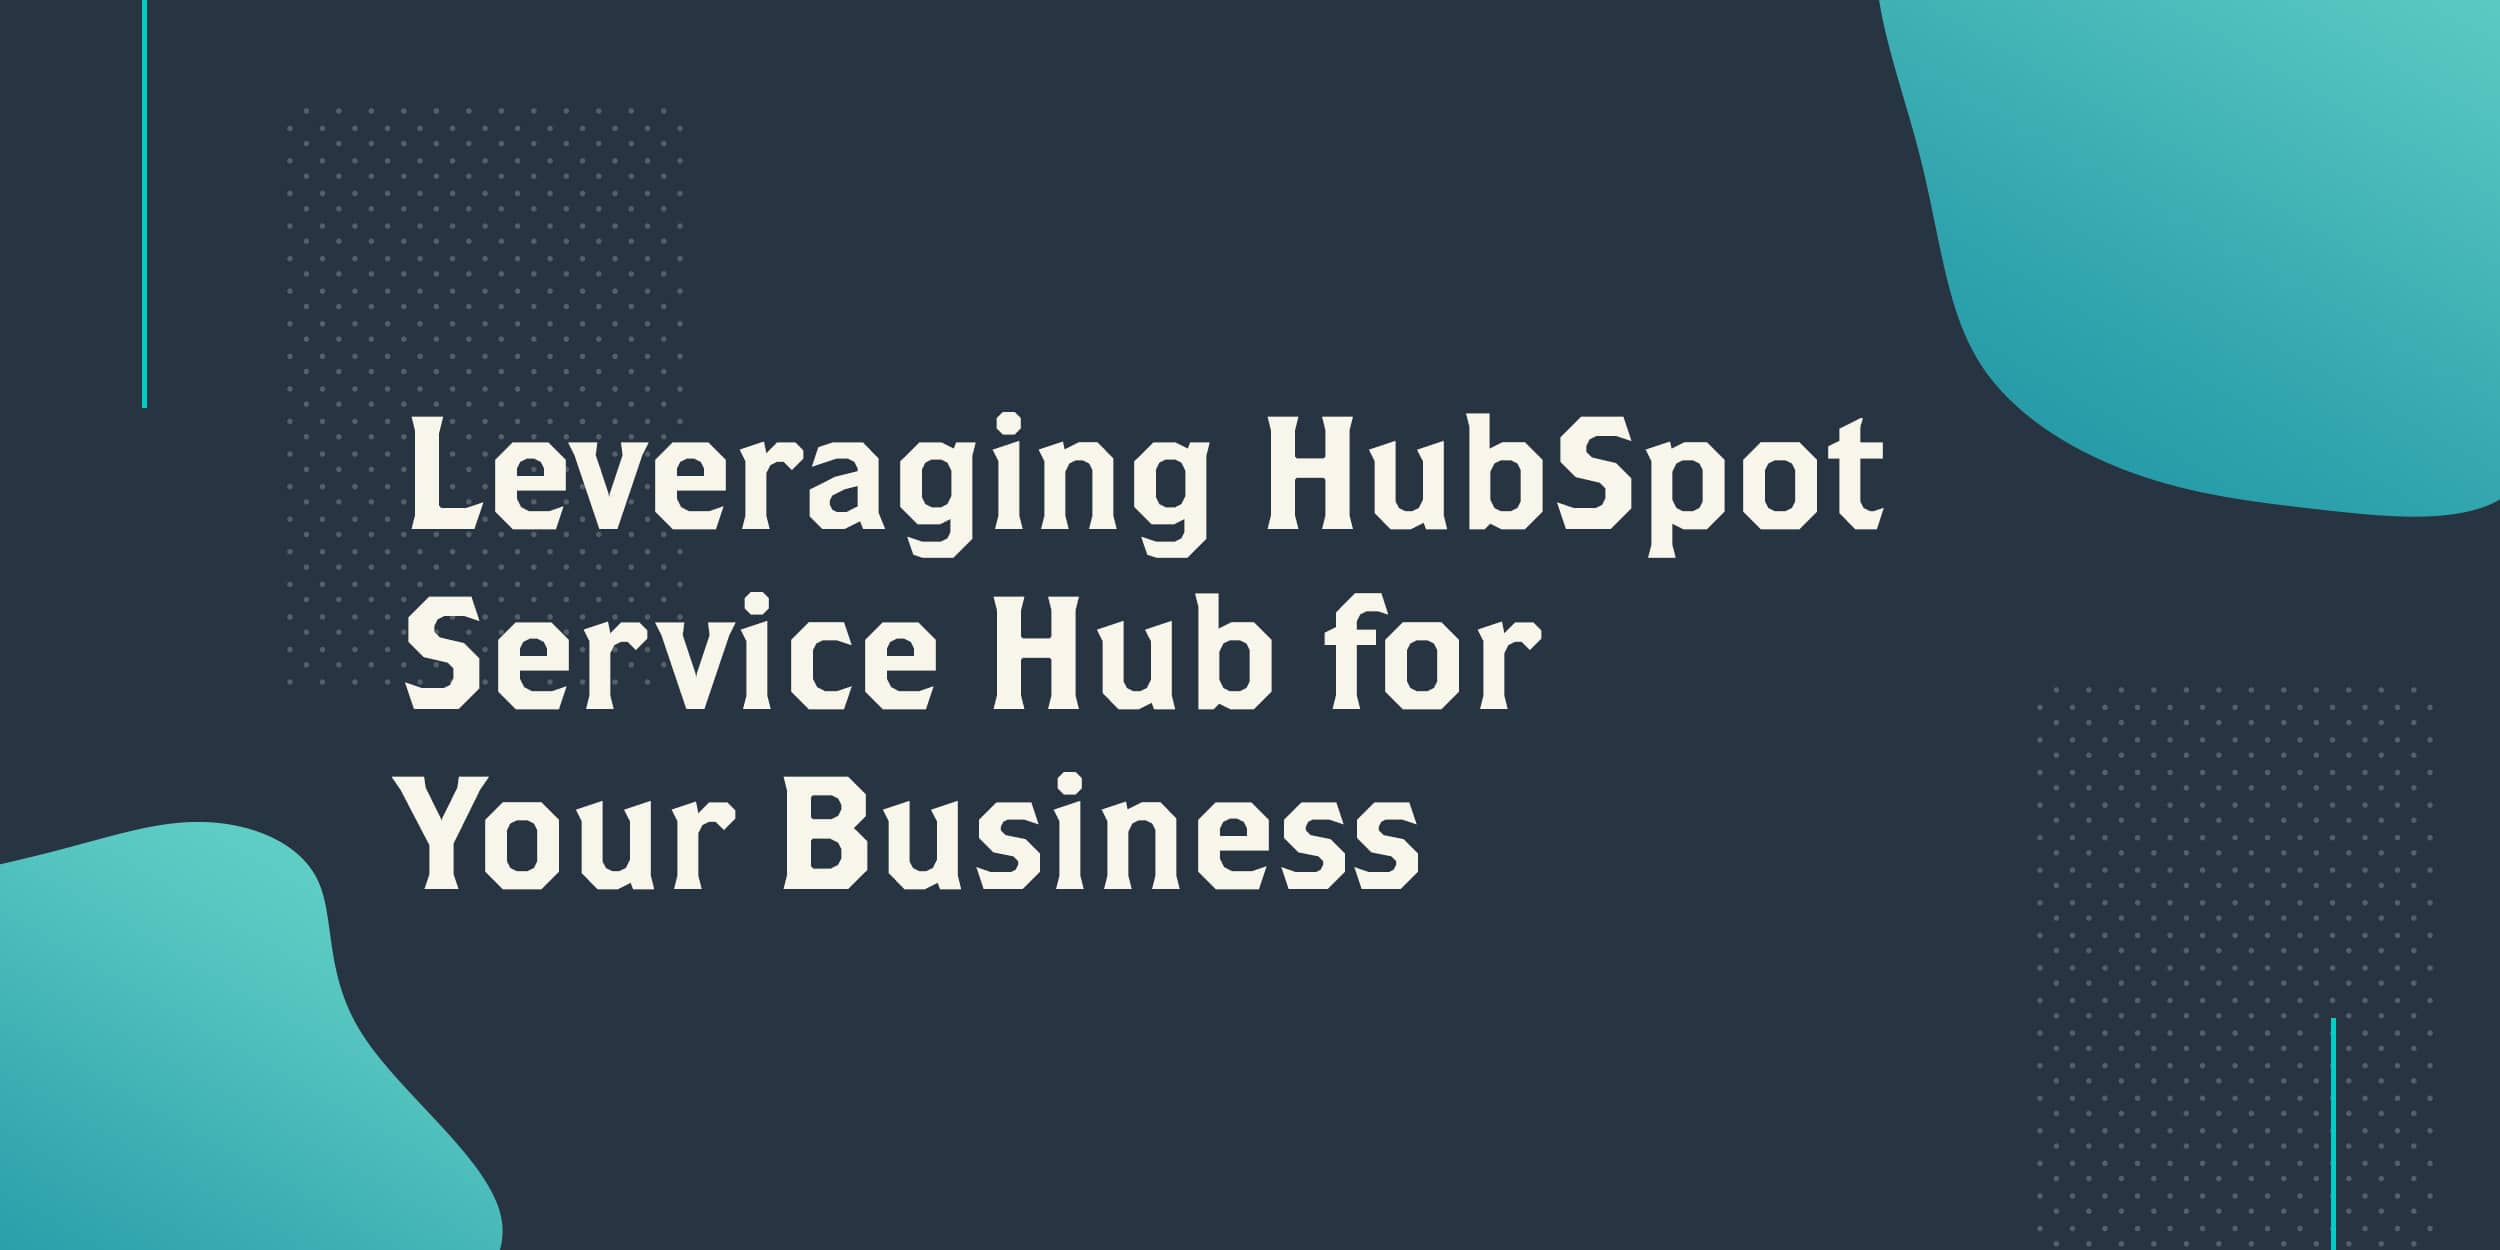 White text on a blue background that says Leveraging HubSpot Service Hub for Your Business